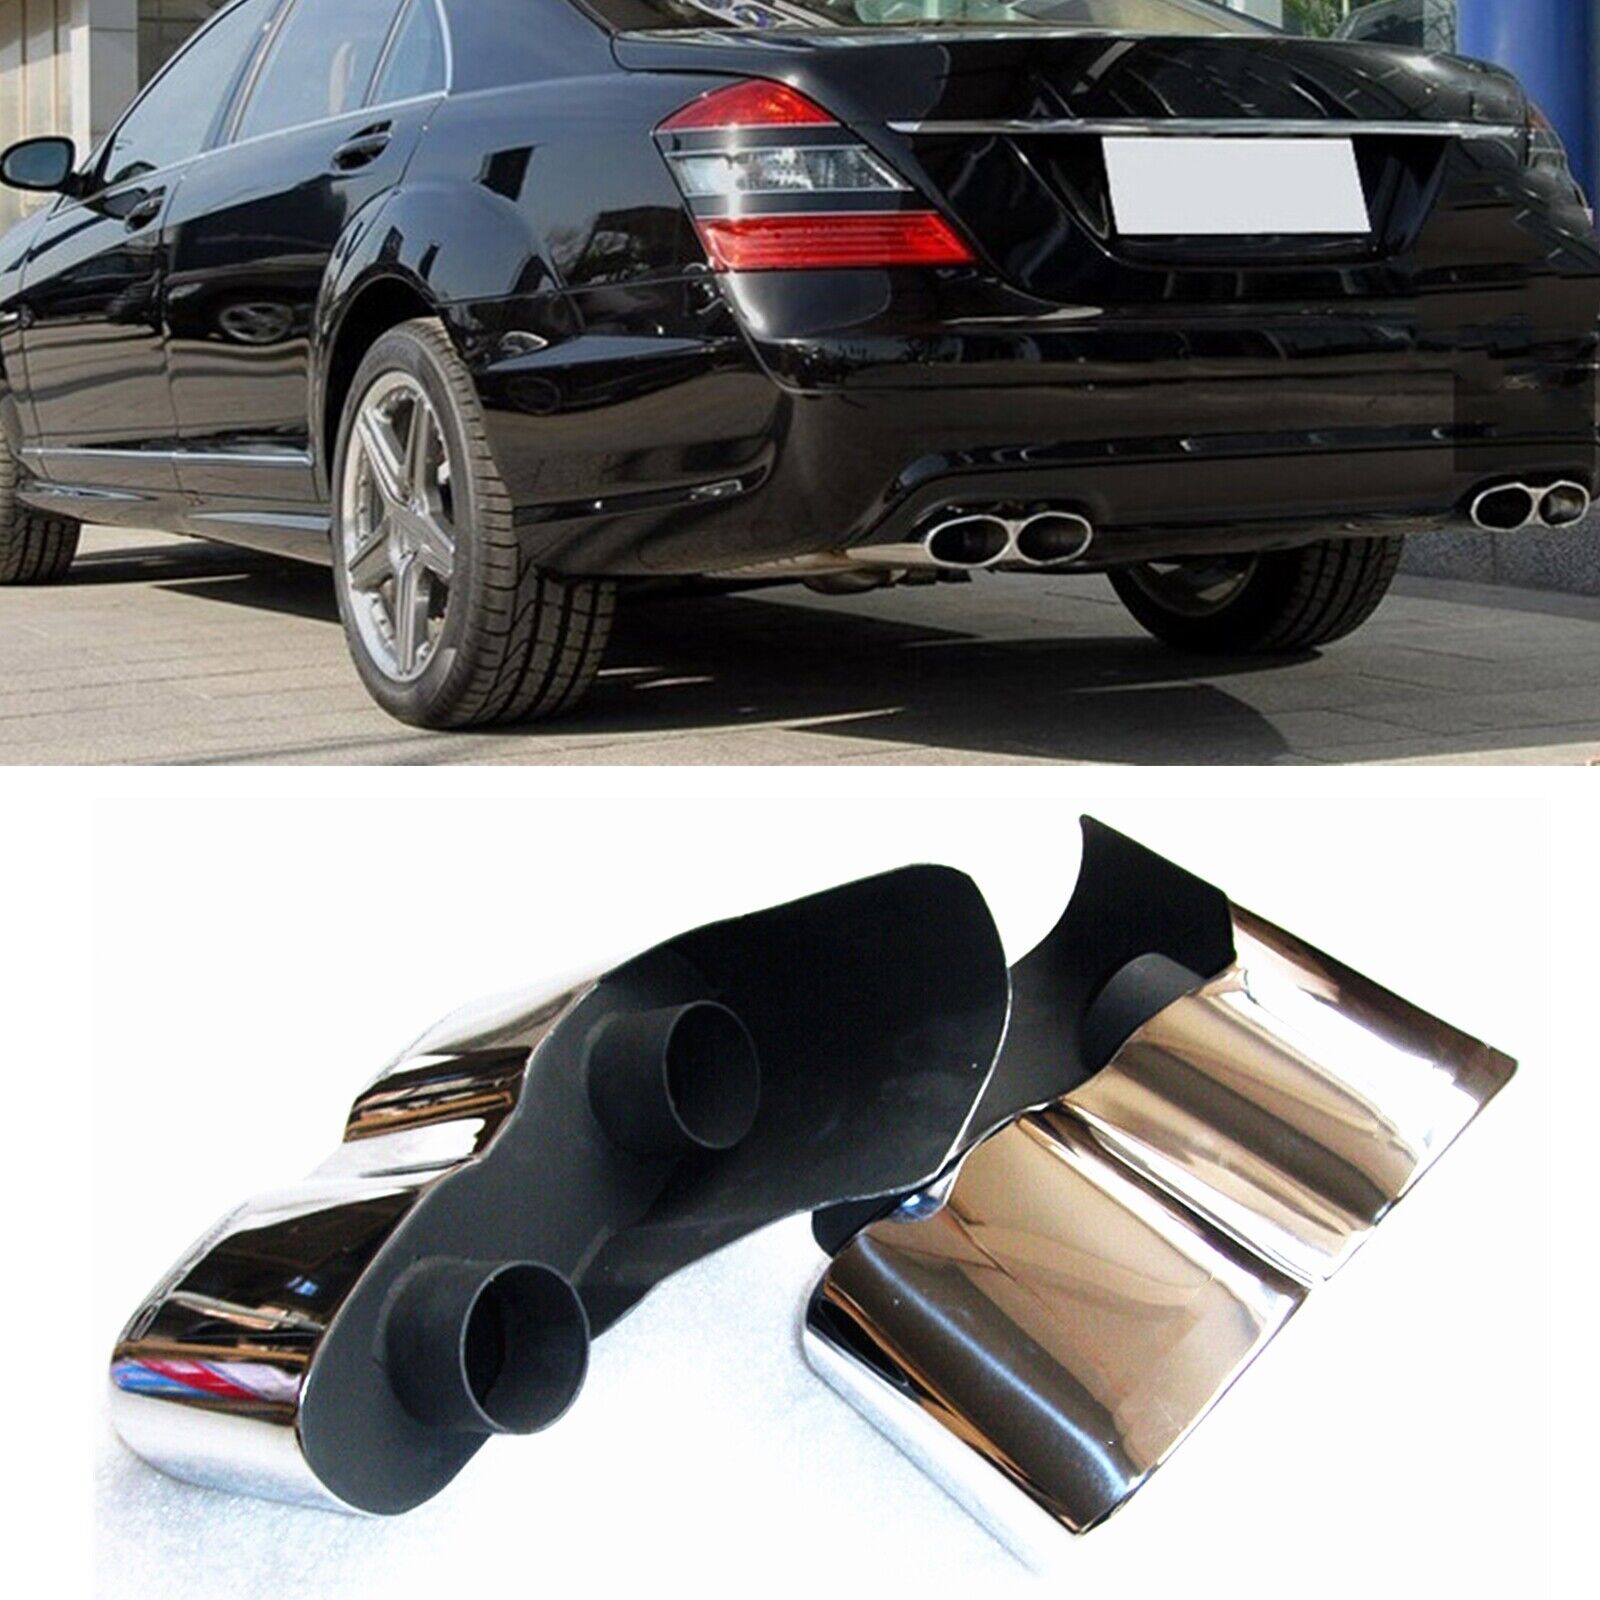 Muffler Exhaust Tail Pipe Tip For Mercedes BENZ W221 S500 S550 S600 S63 S65